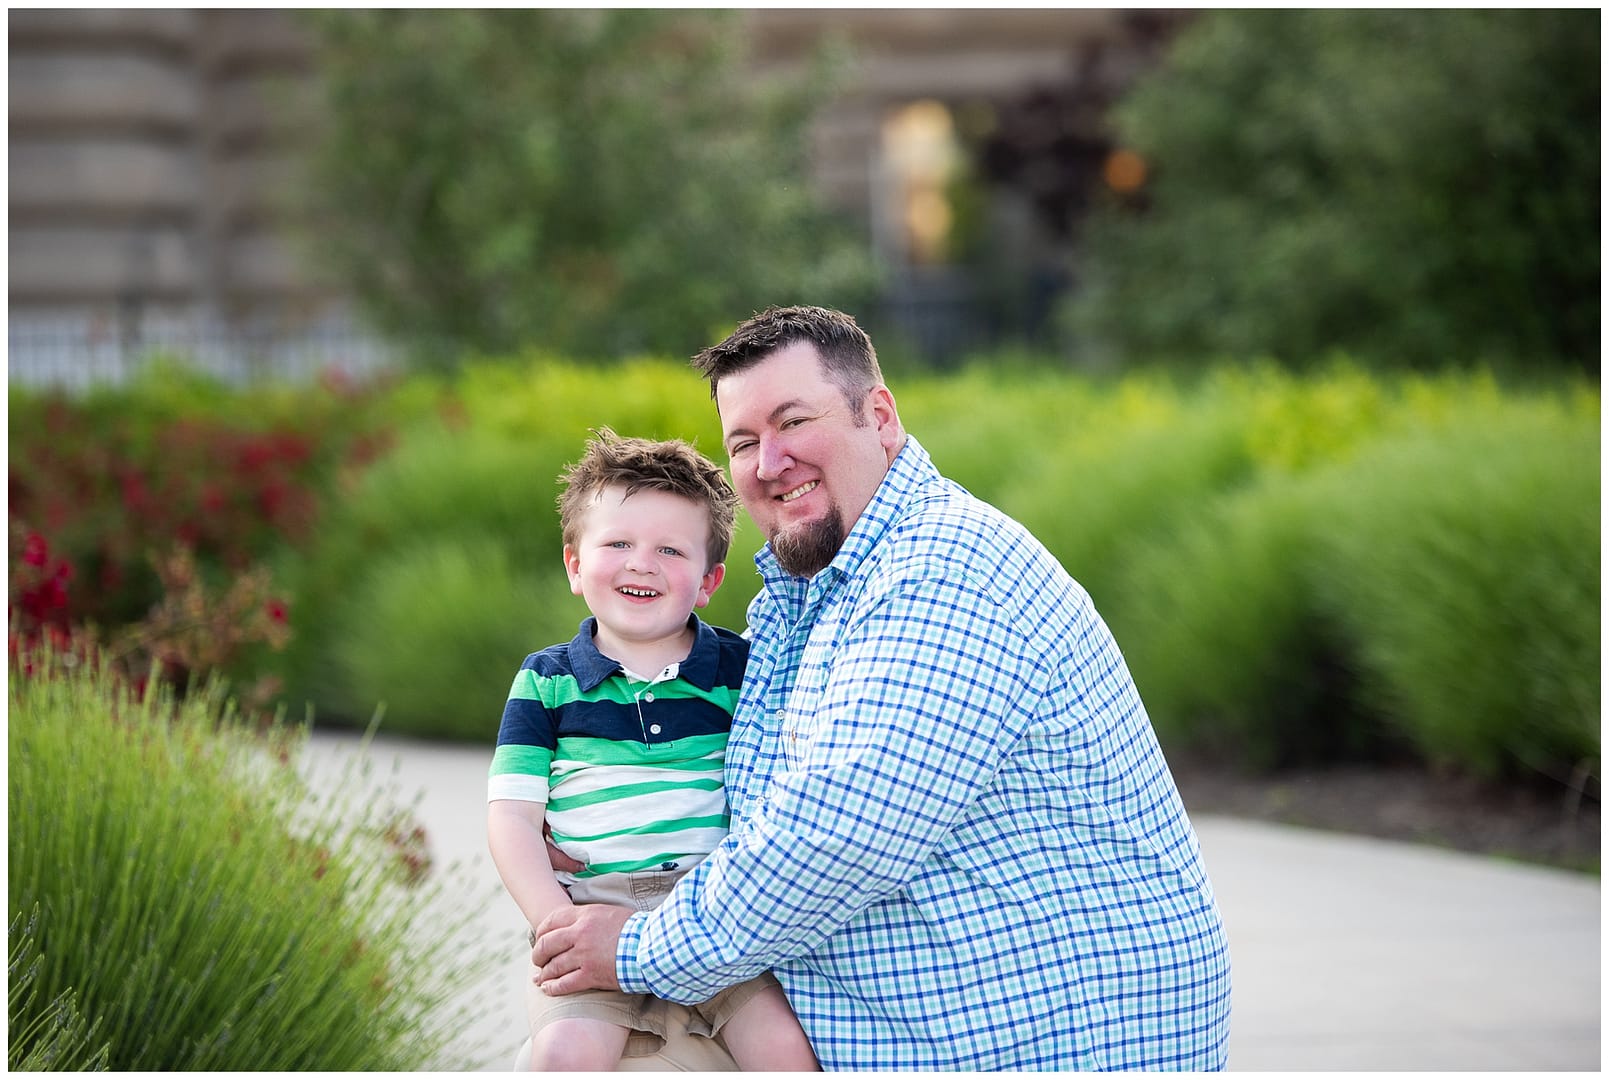 Father and son pose for photo. Photos by Tiffany Hix Photography.